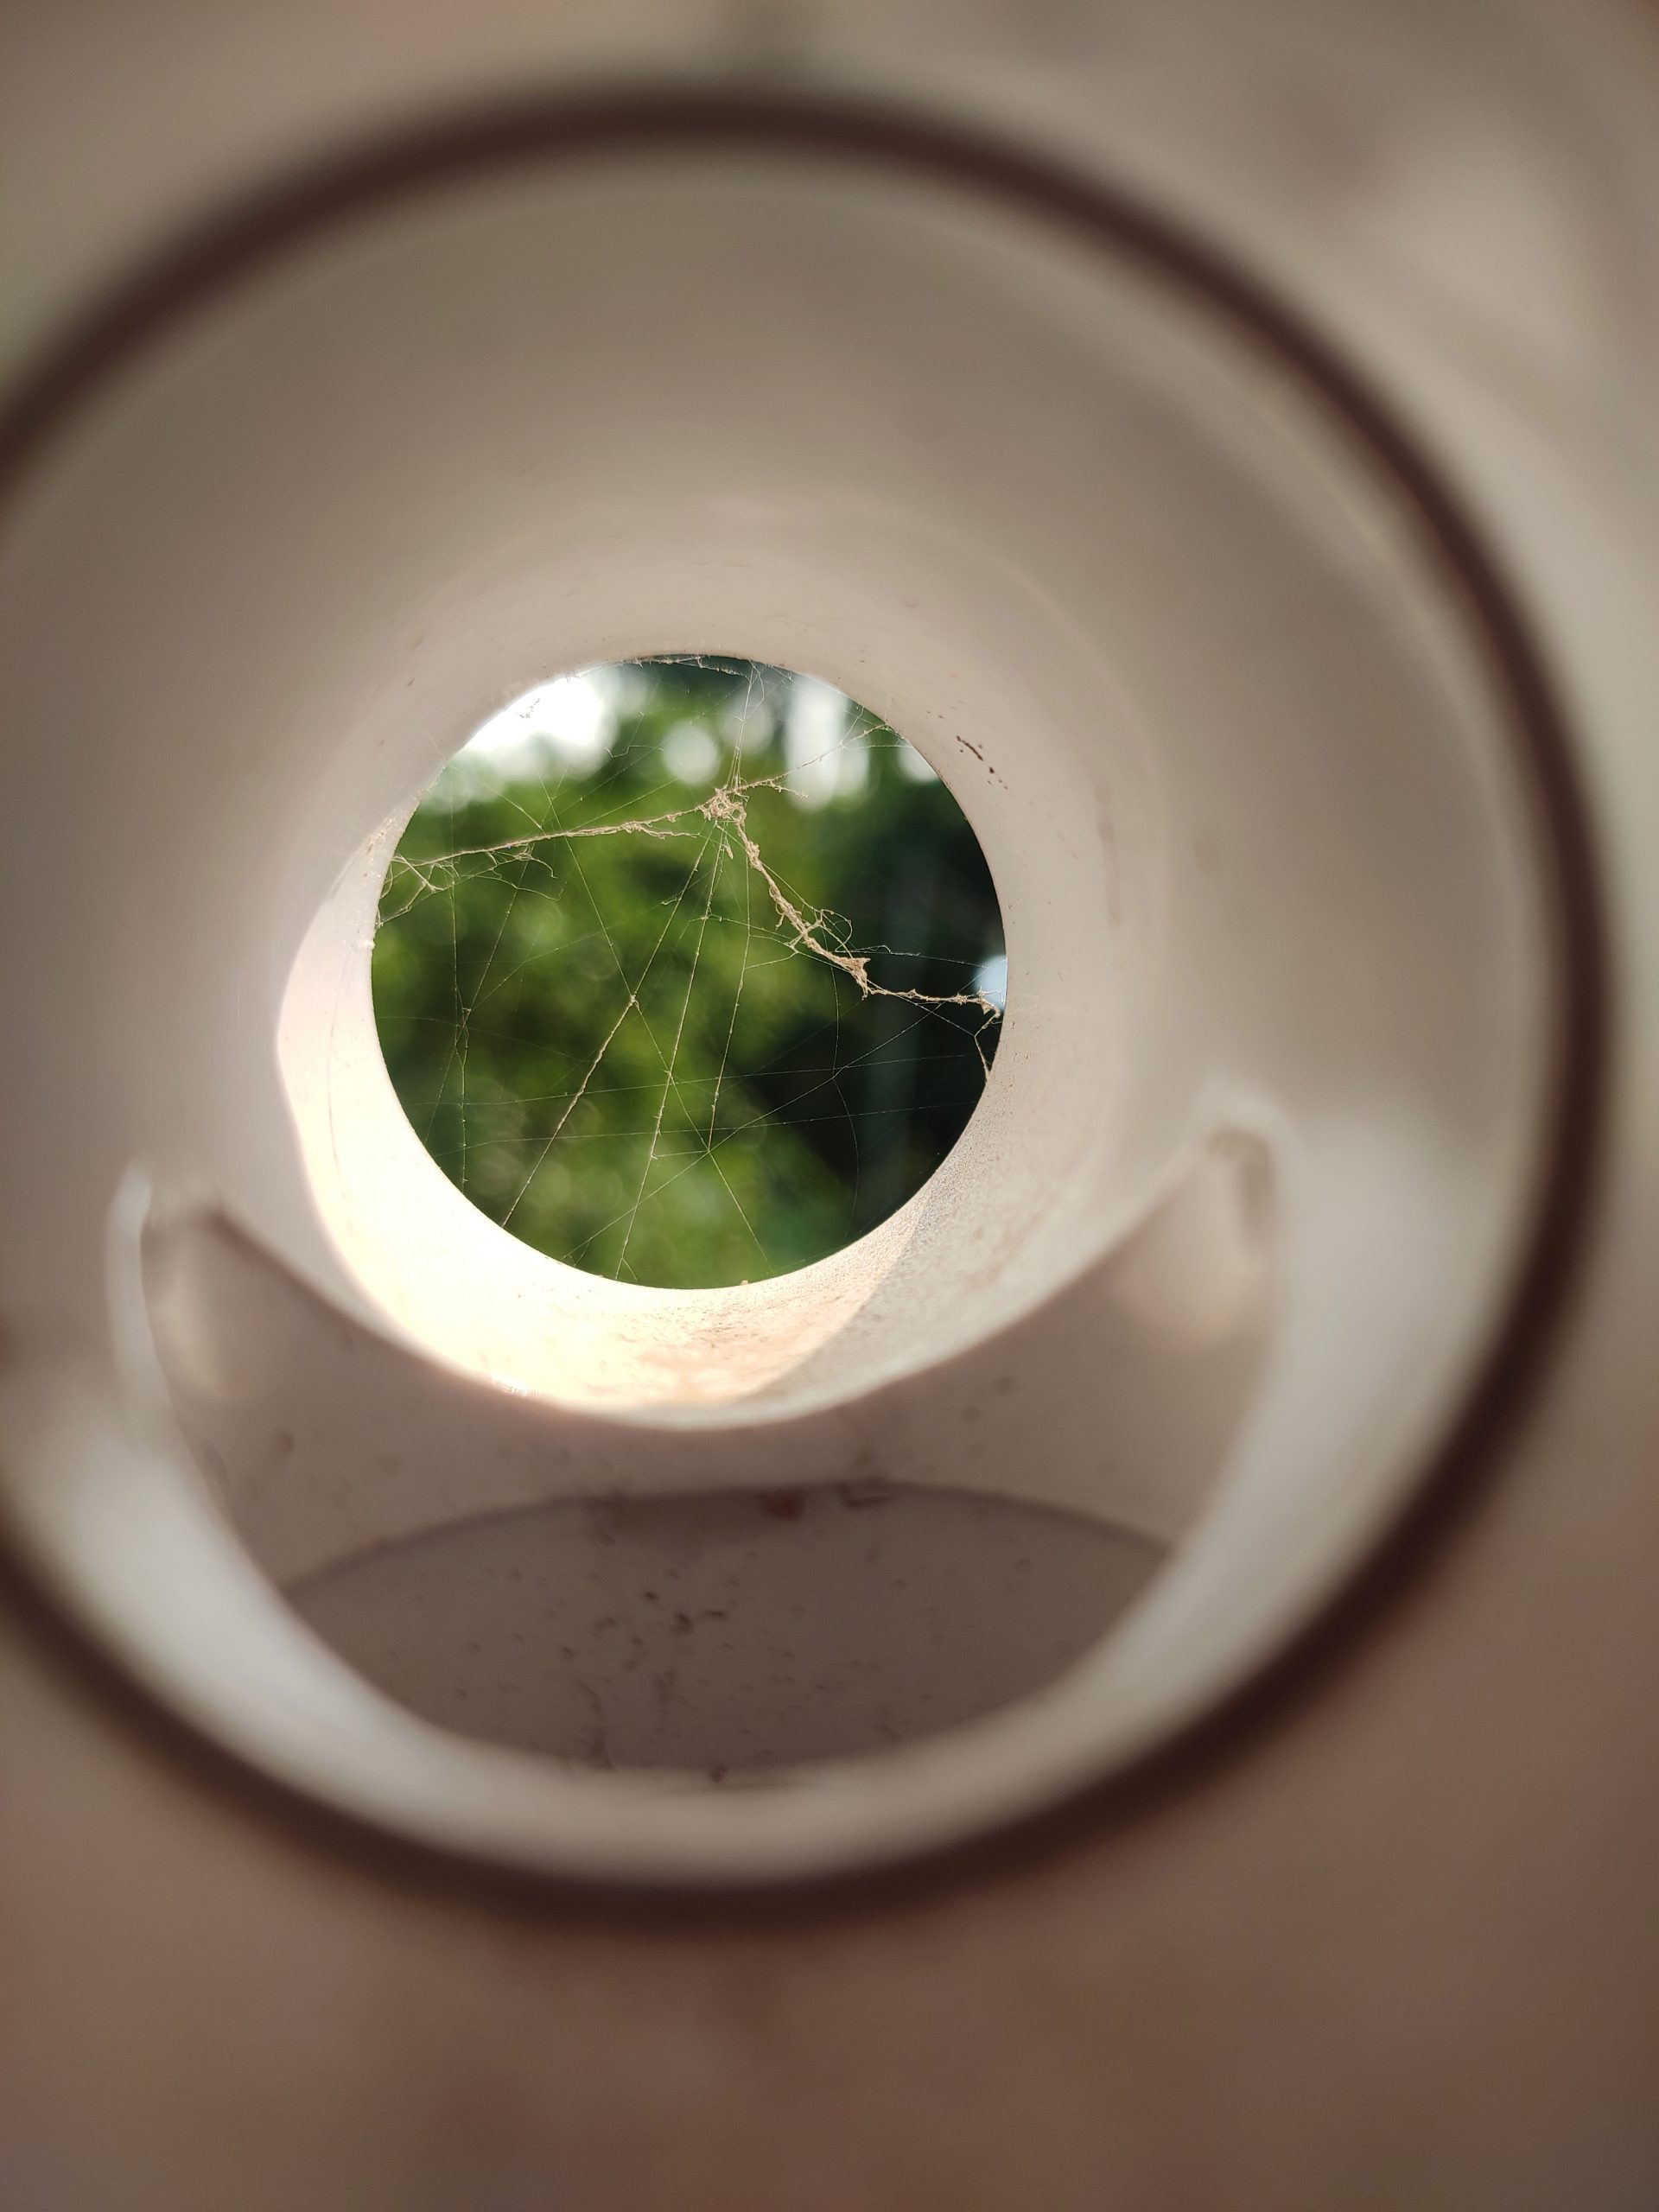 Spider web in a pipe